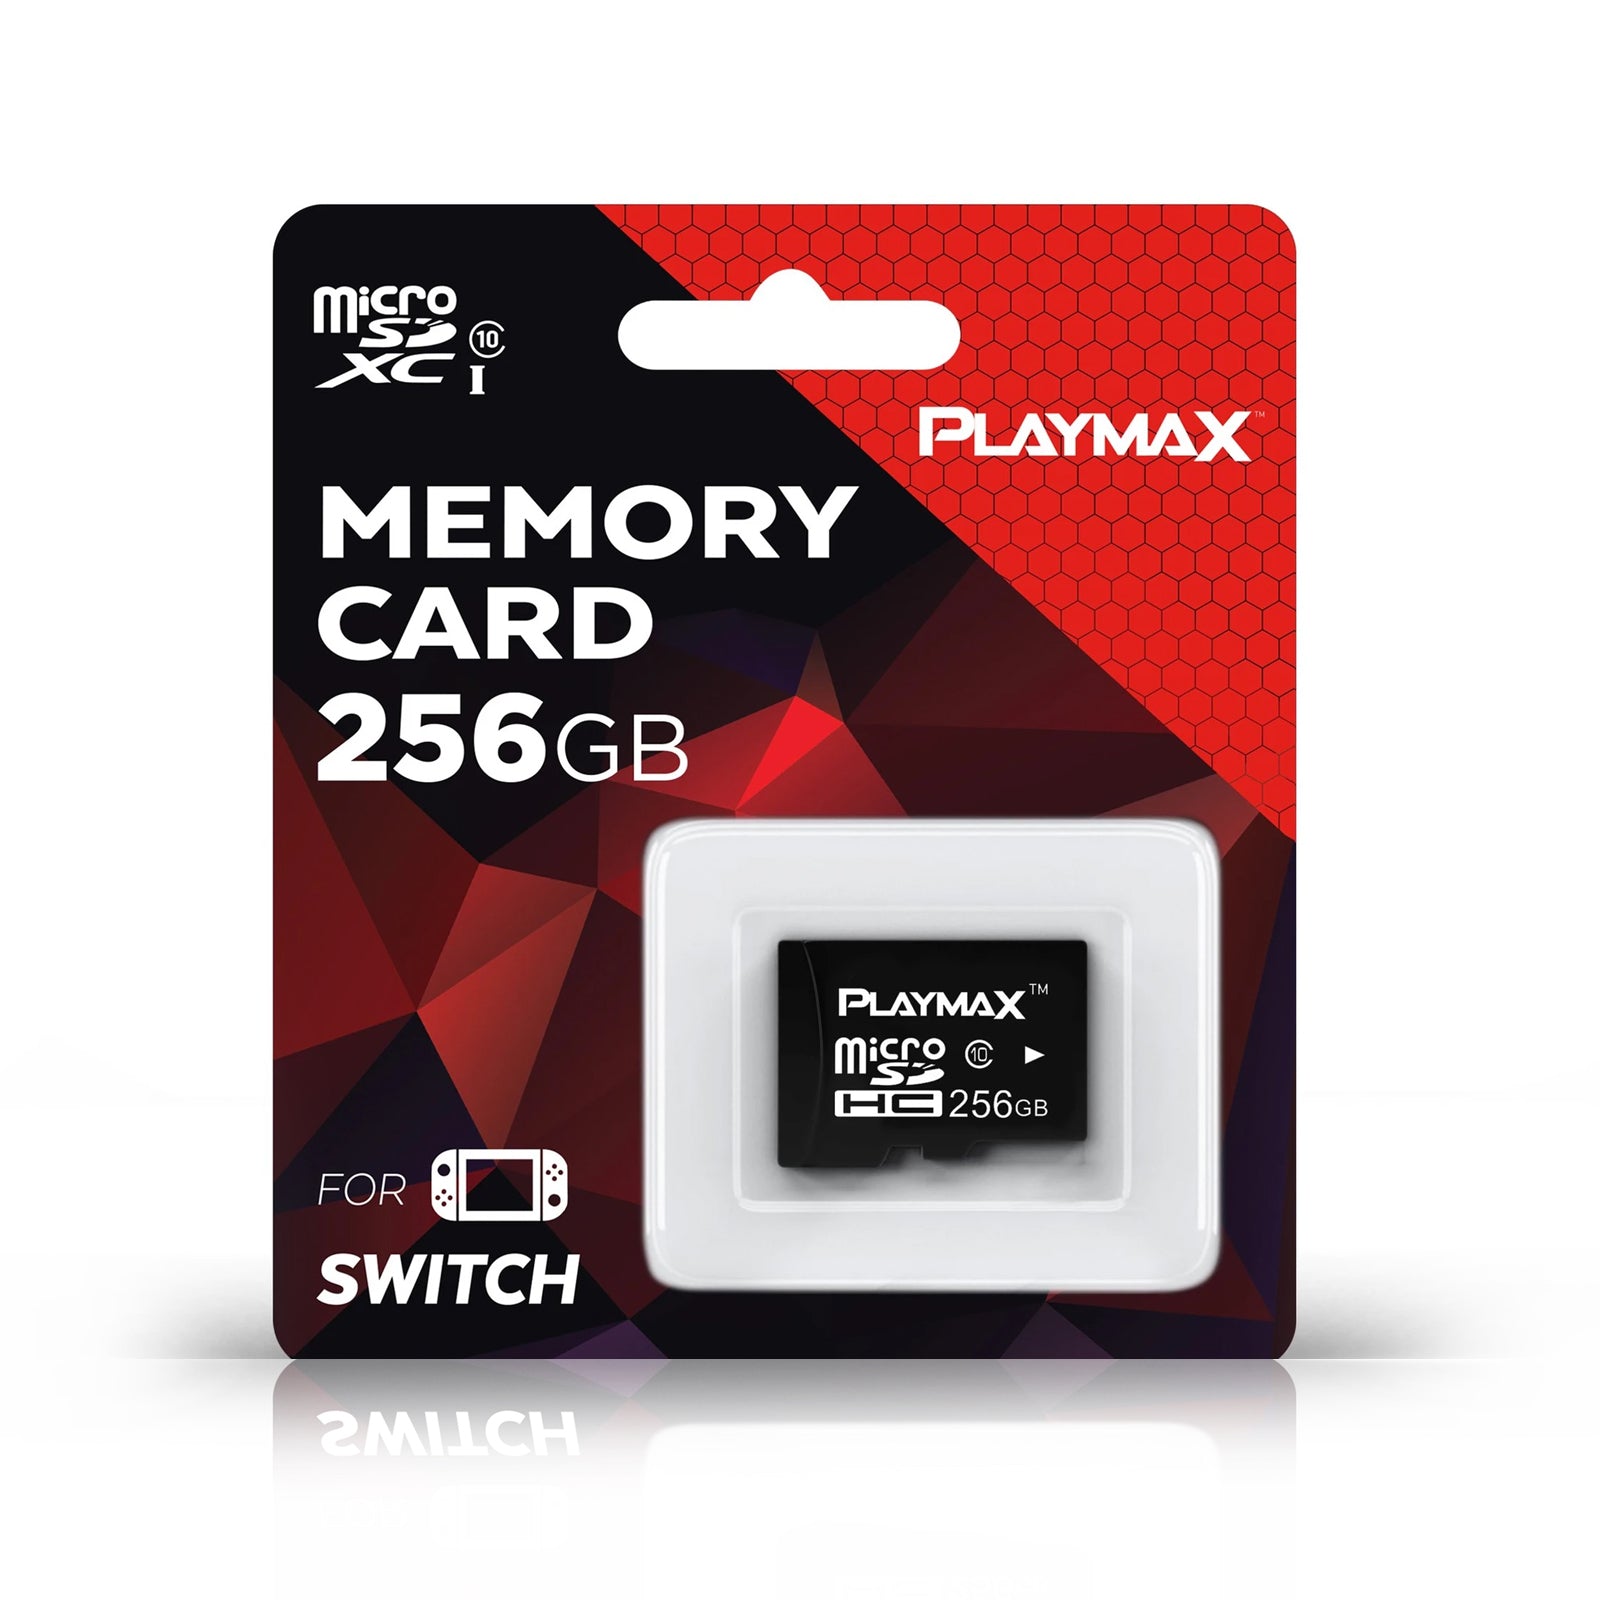 PLAYMAX MEMORY CARD 256GB FOR SWITCH